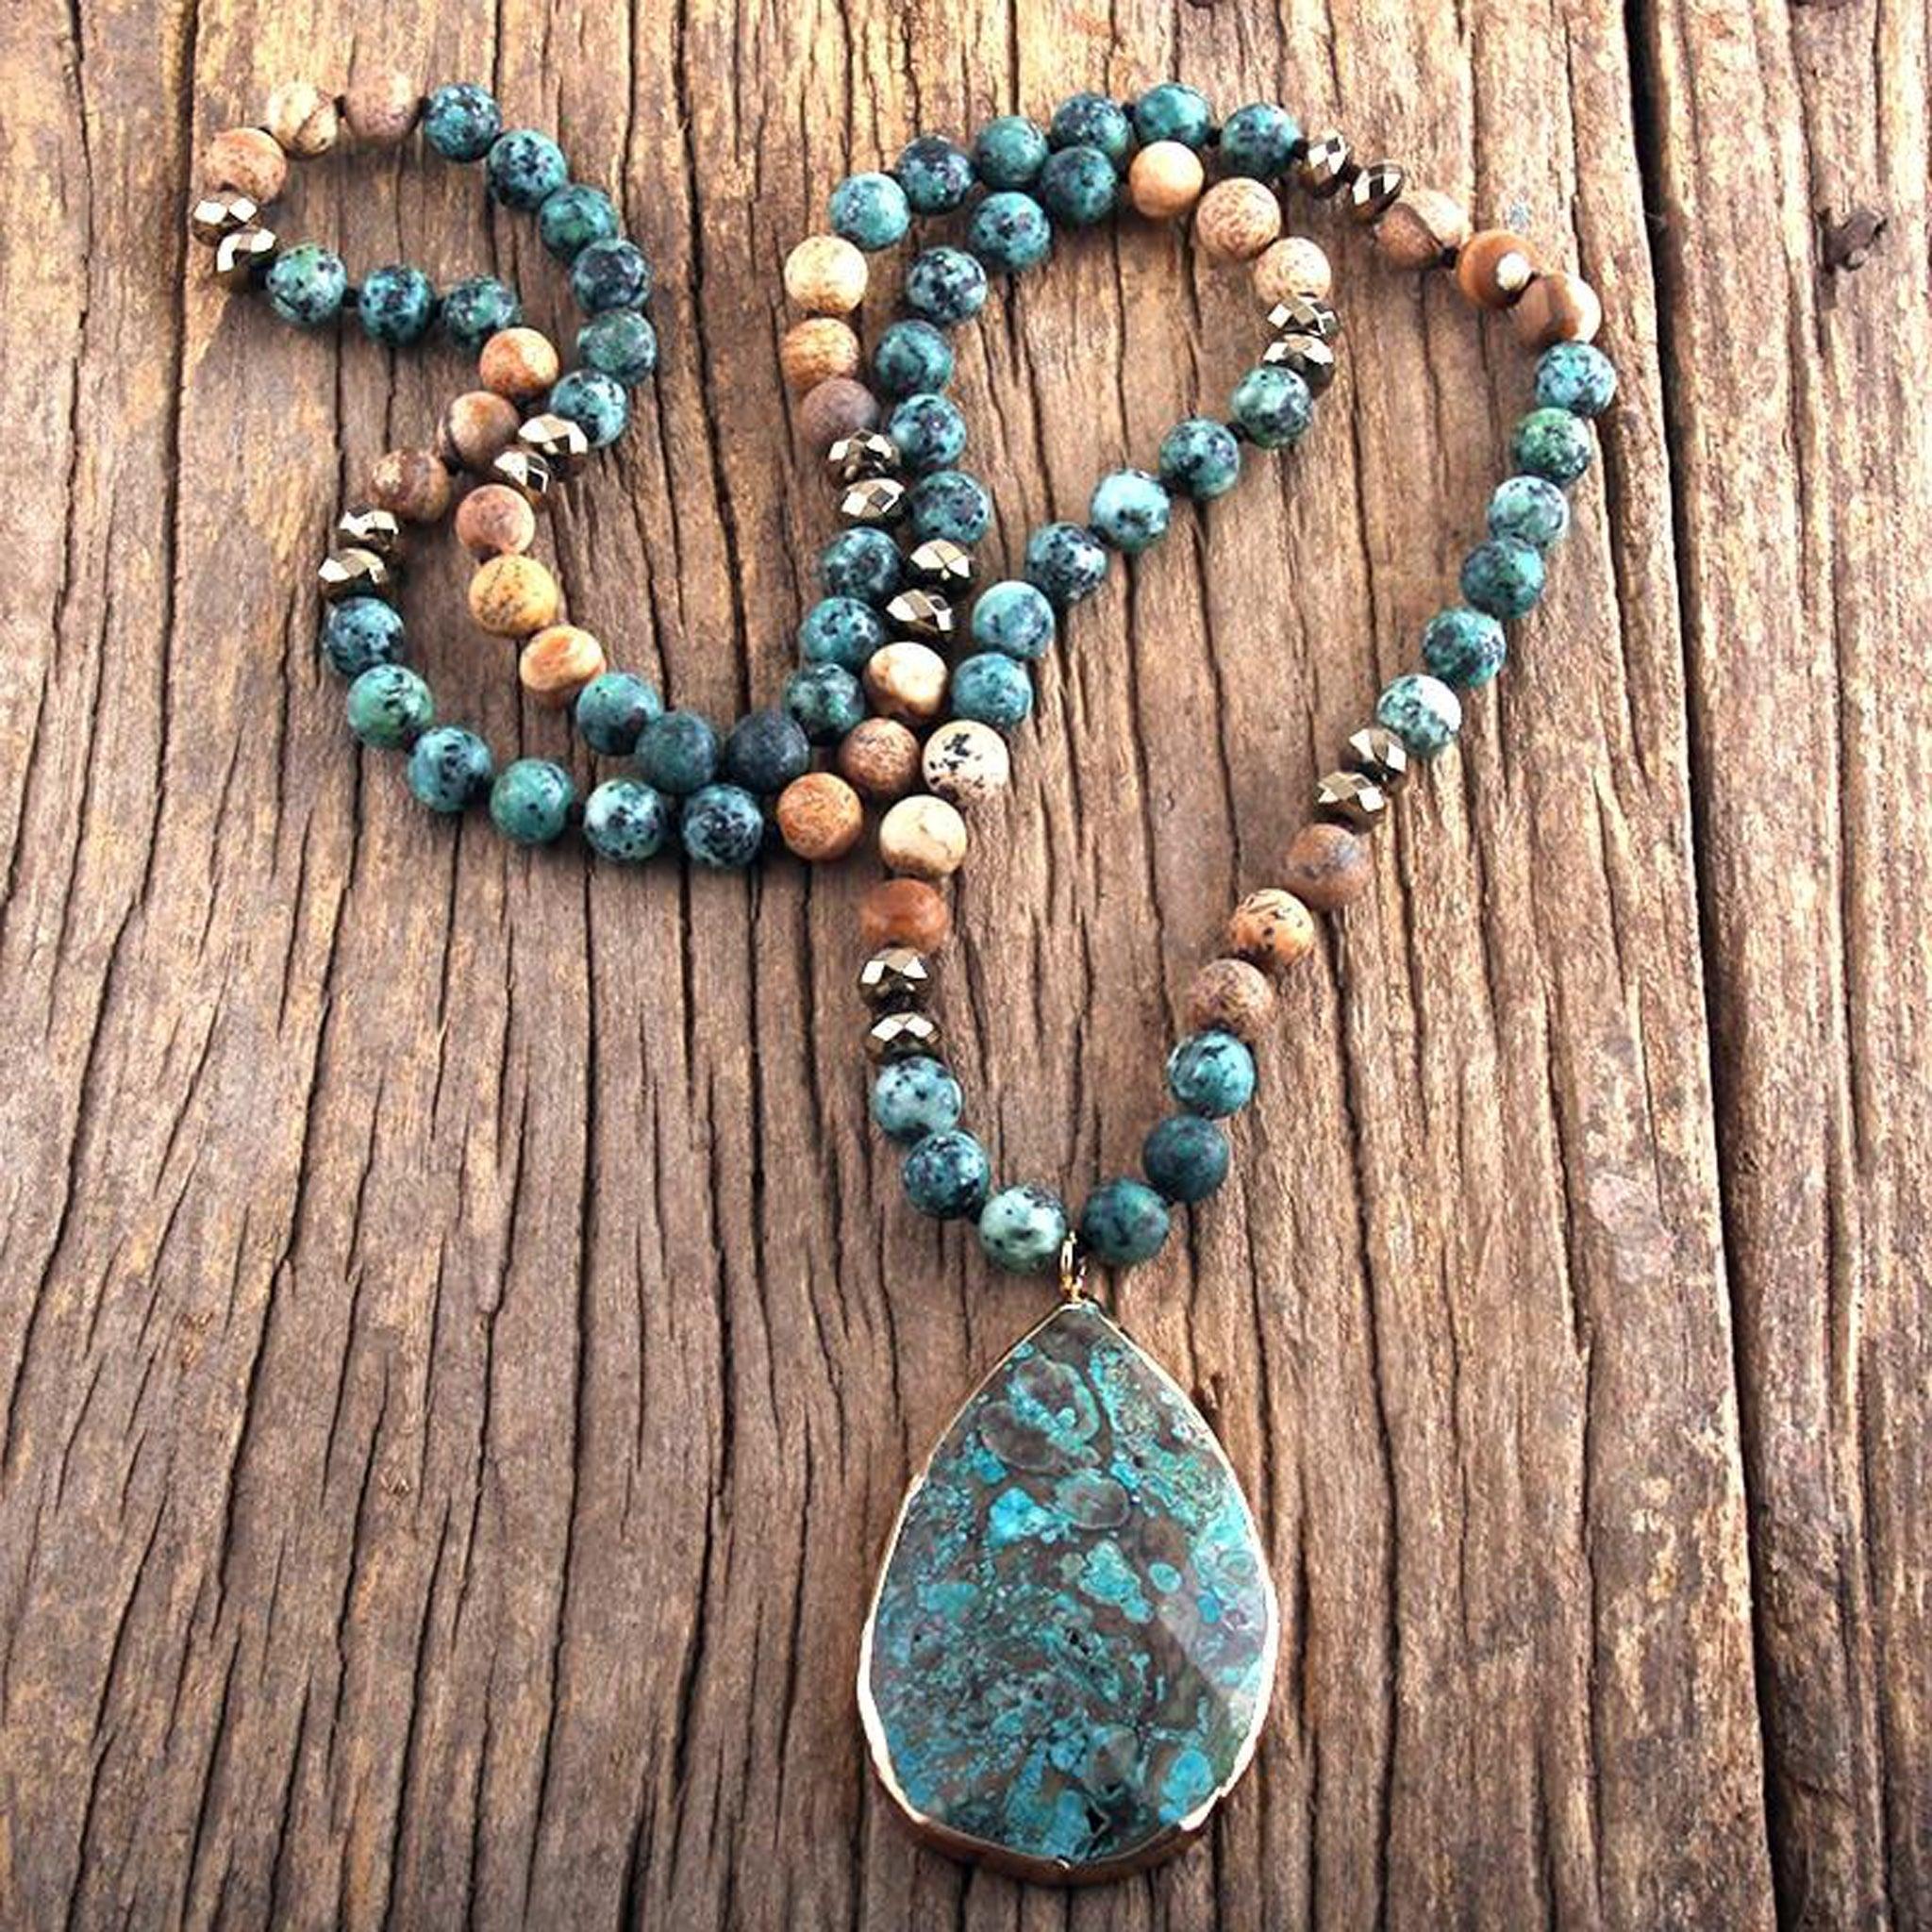 Boho Jewelry Natural Stones Necklace - Kevous